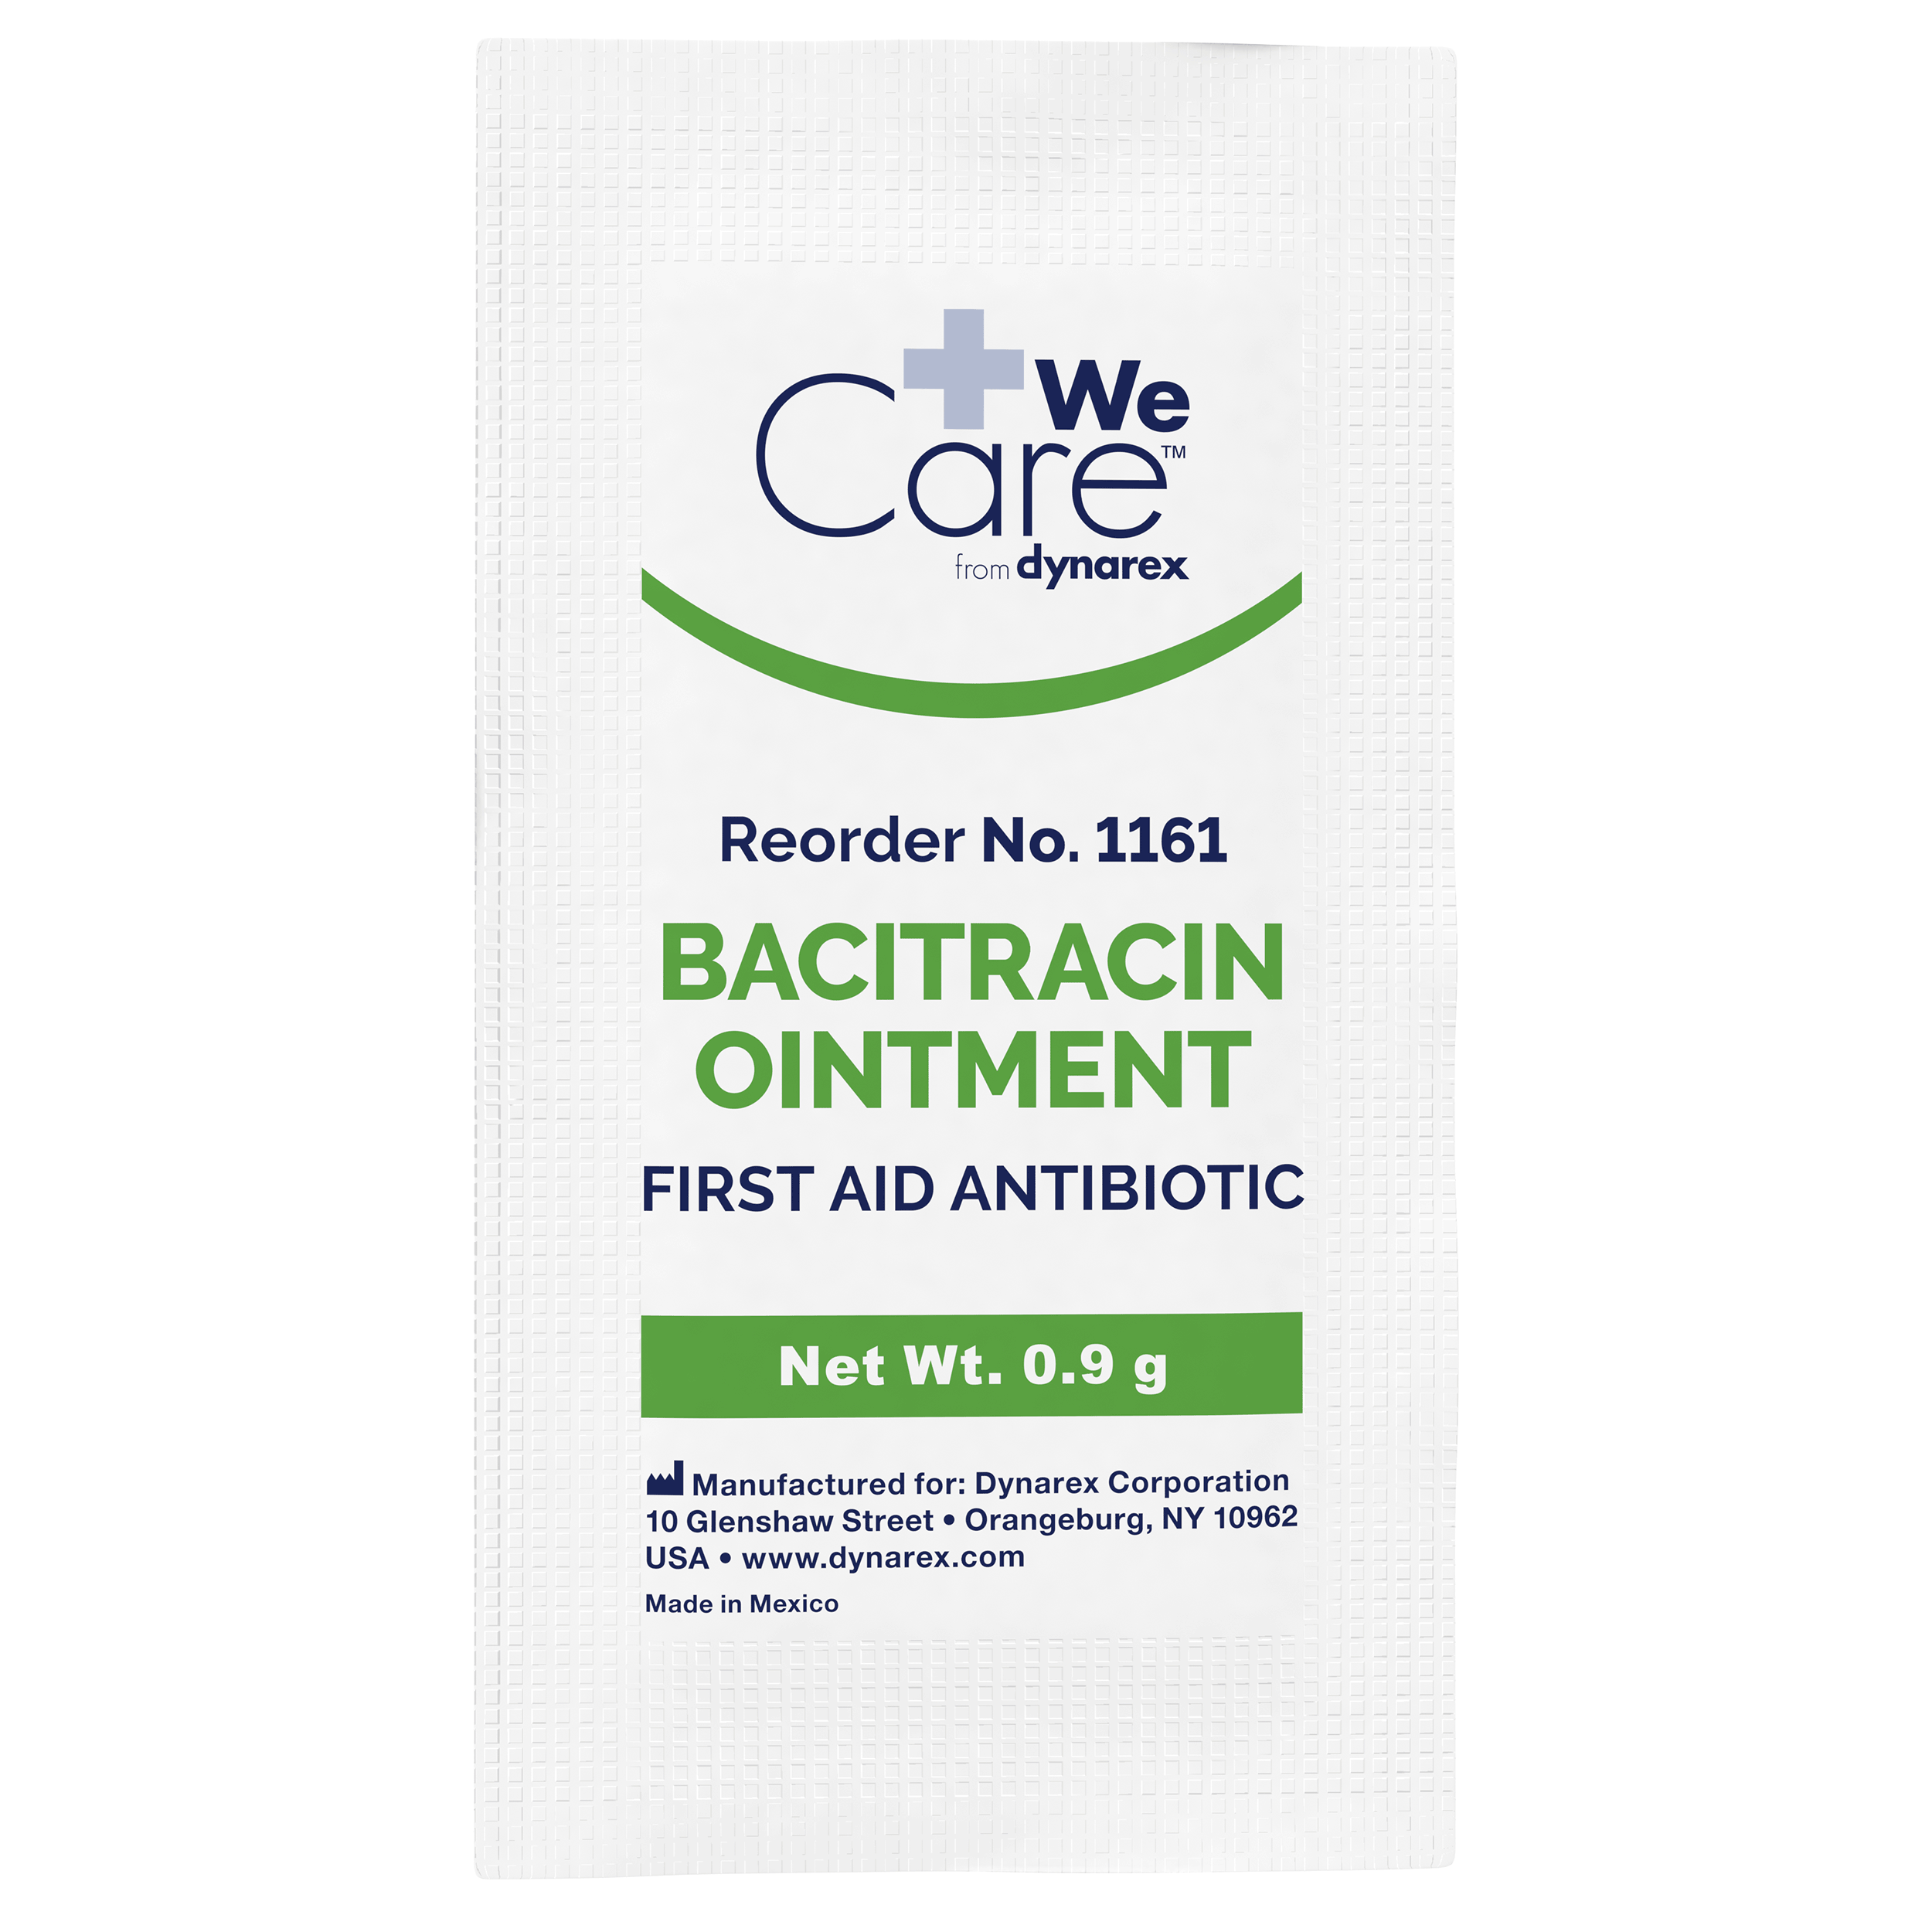 Bacitracin Ointment 0.9g foil pack